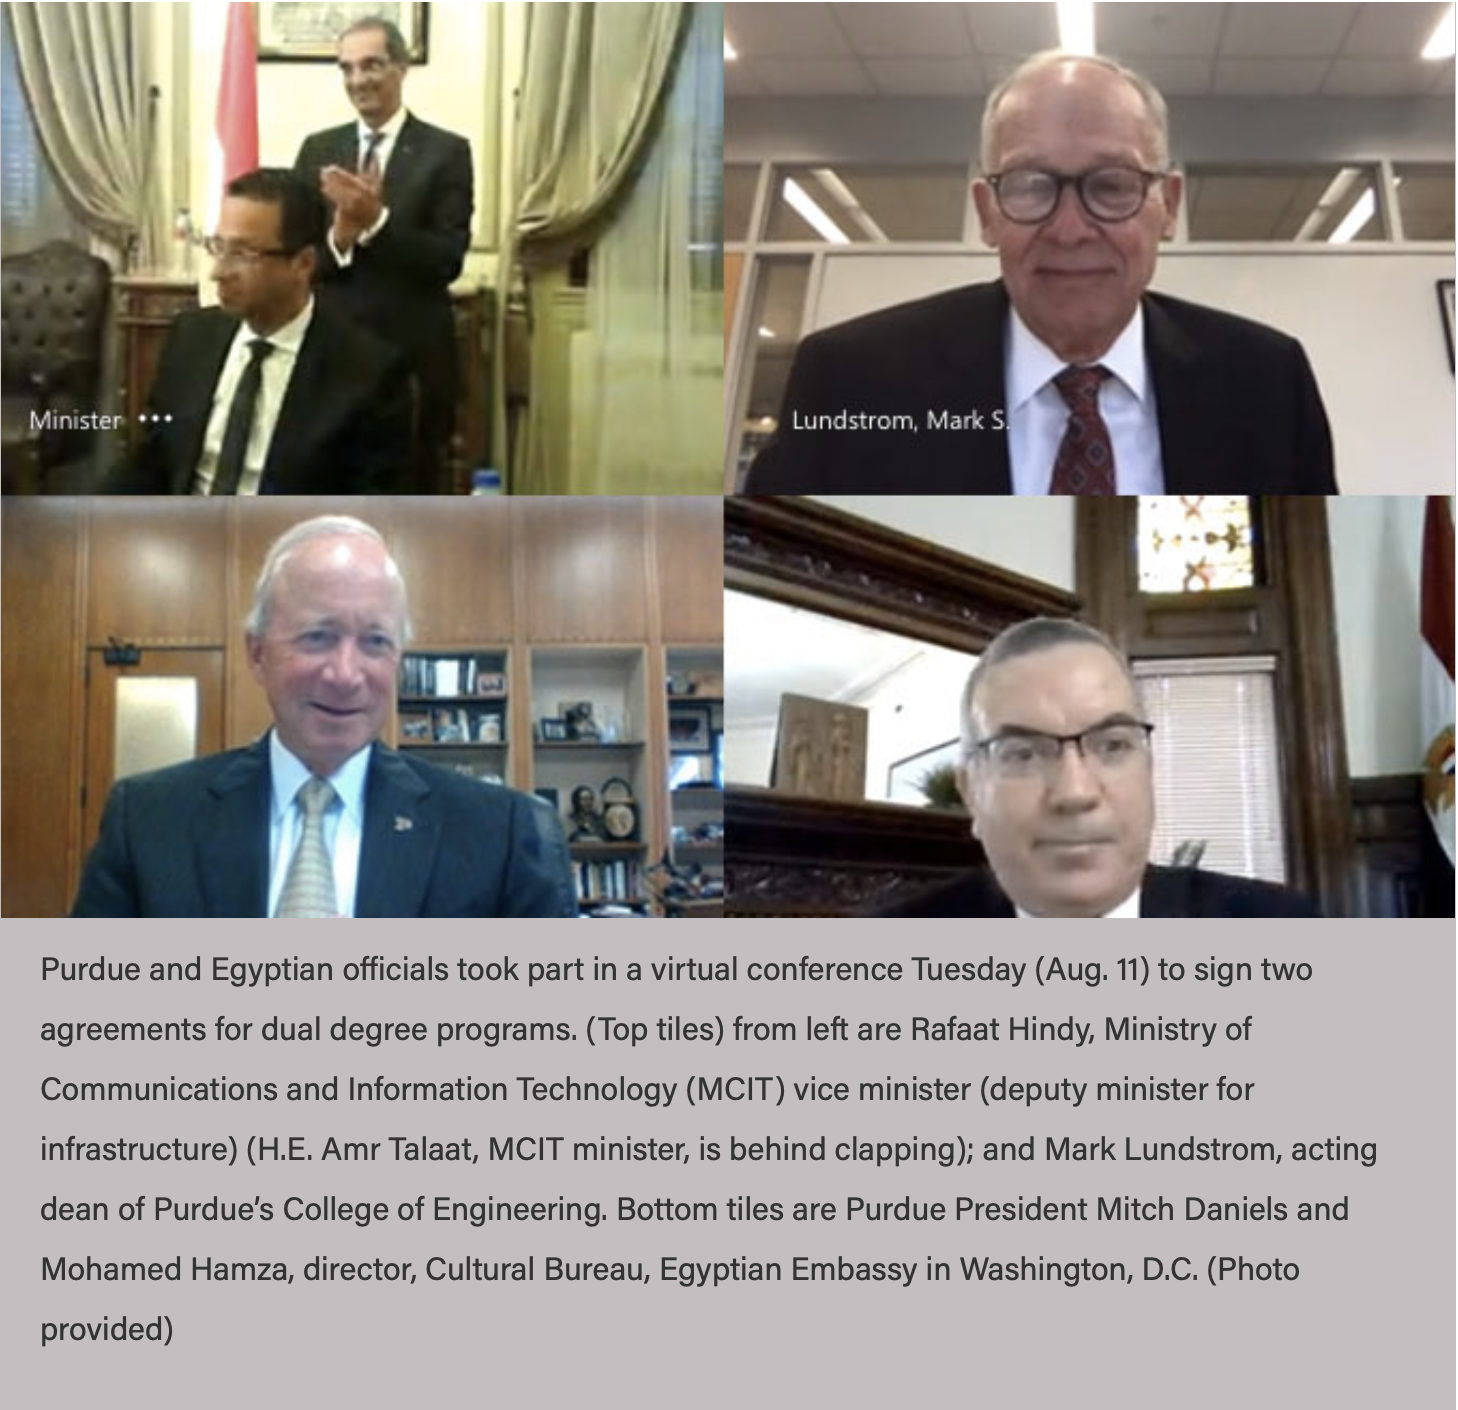 Purdue and Egyptian officials took part in a virtual conference Tuesday (Aug. 11) to sign two agreements for dual degree programs. (Top tiles) from left are Rafaat Hindy, Ministry of Communications and Information Technology (MCIT) vice minister (deputy minister for infrastructure) (H.E. Amr Talaat, MCIT minister, is behind clapping); and Mark Lundstrom, acting dean of Purdue’s College of Engineering. Bottom tiles are Purdue President Mitch Daniels and Mohamed Hamza, director, Cultural Bureau, Egyptian Embassy in Washington, D.C. (Photo provided)